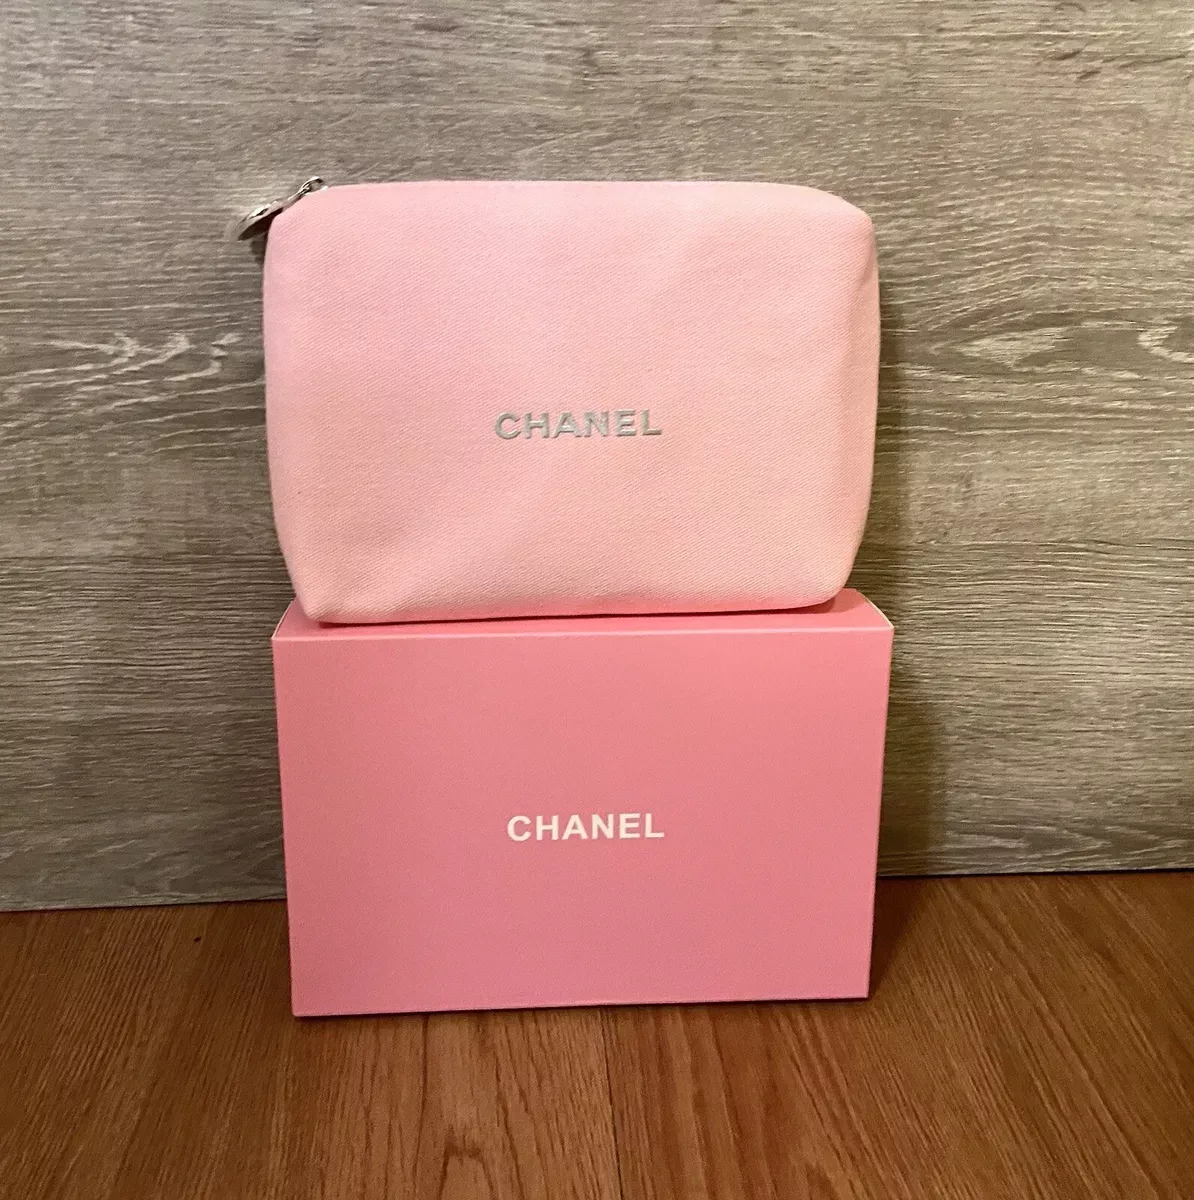 CHANEL Beauty Beige Cosmetic Bag Makeup Pouch VIP GIFT New, no box